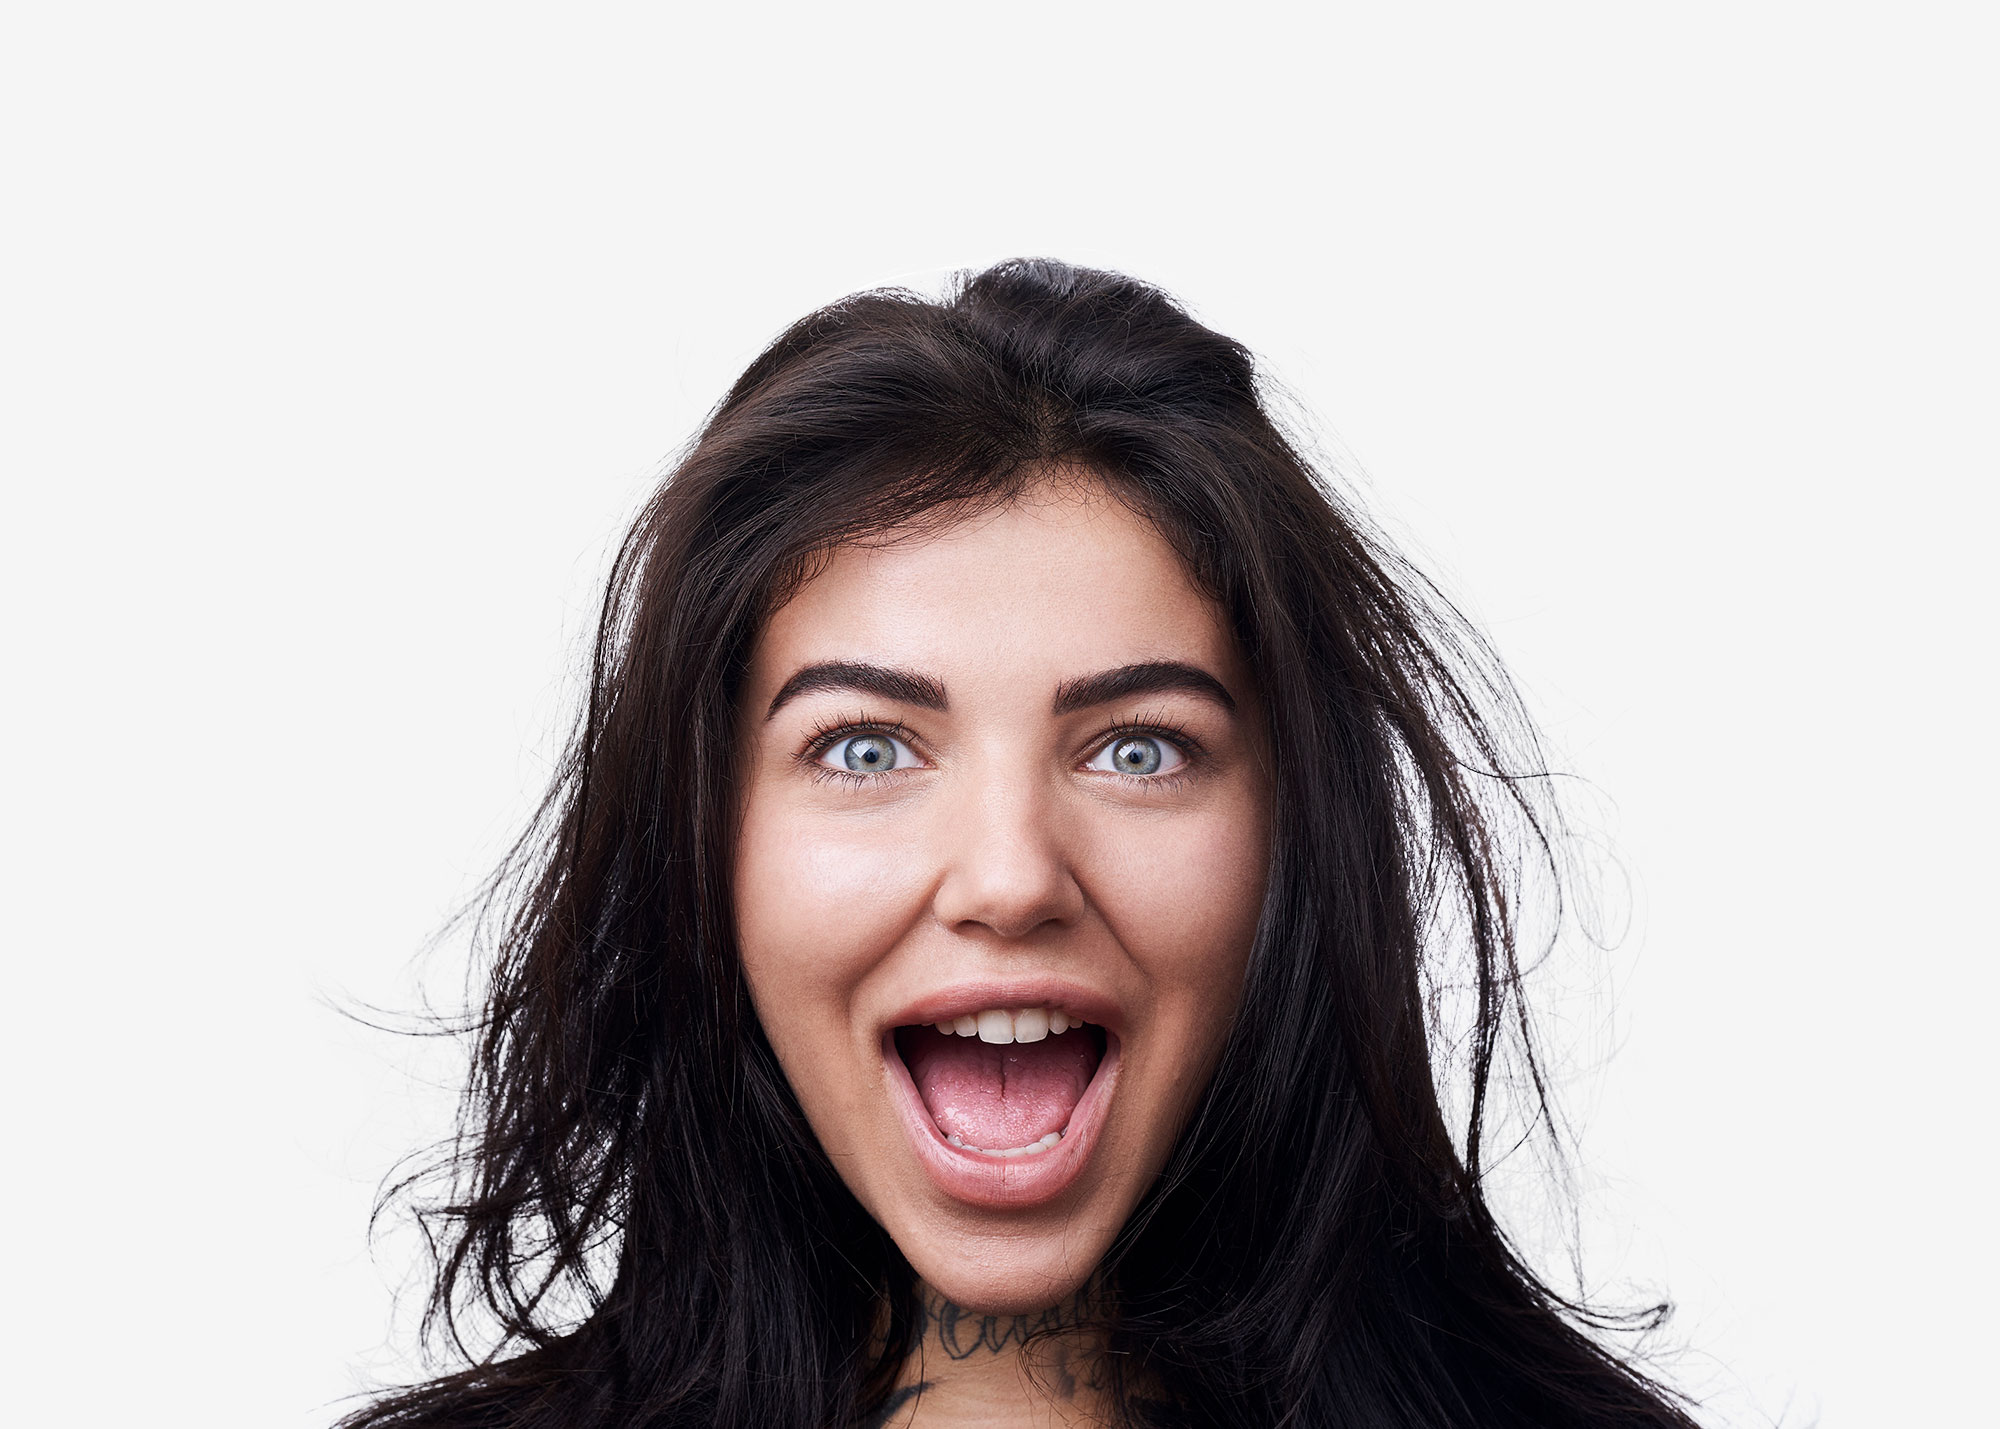 Waldo-contact-lenses-see-the-happiness-campaign-girl-with-neck-tatoo-smiling-sane-seven-2000px-wide